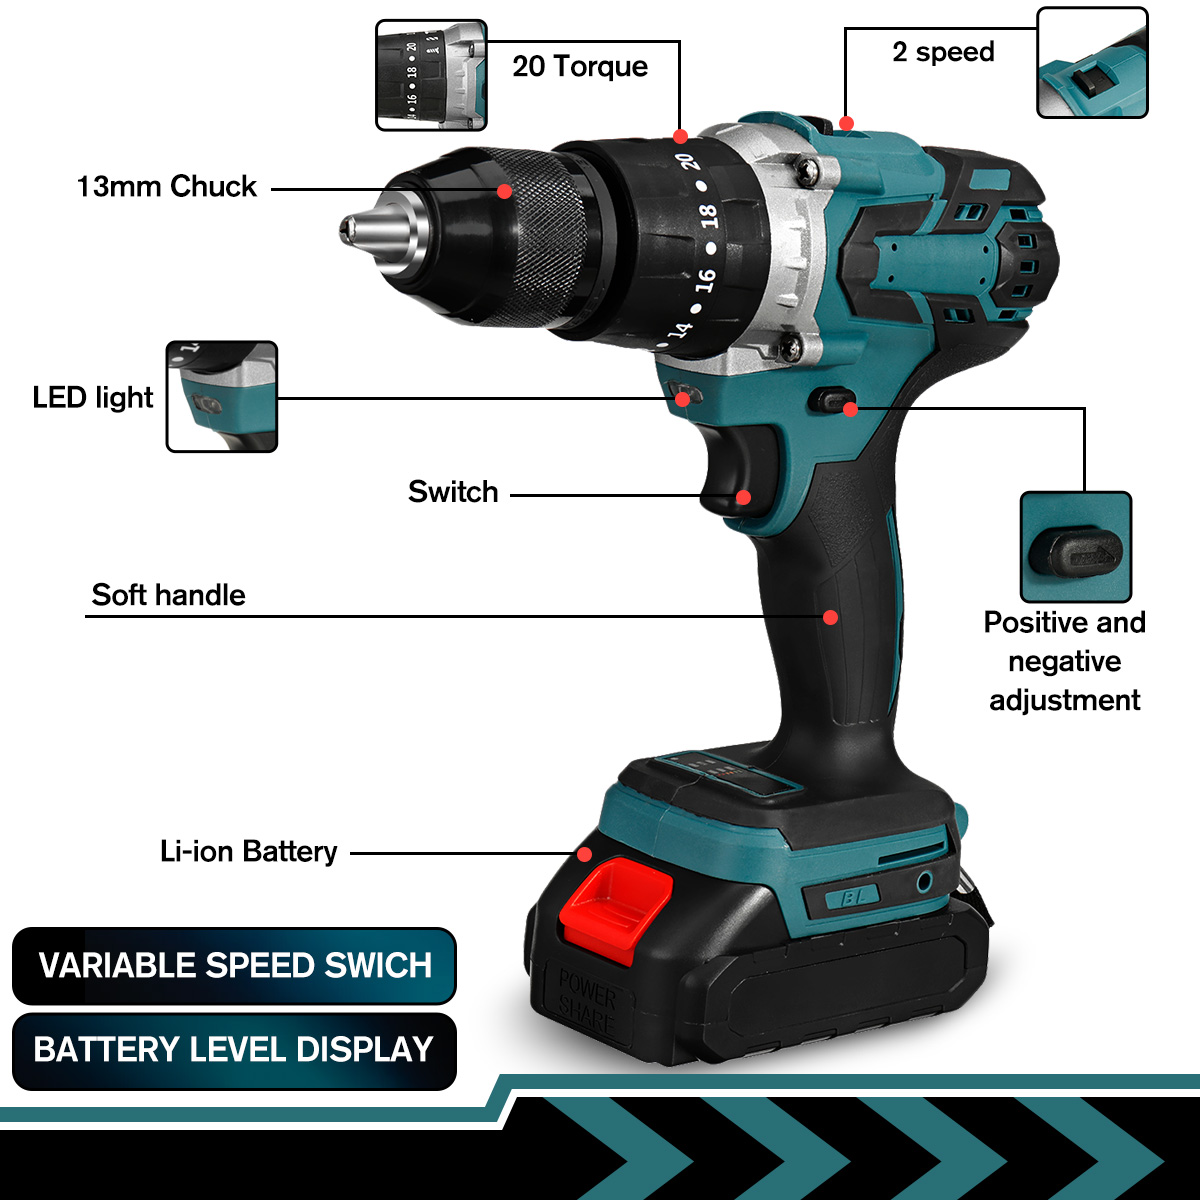 Cordless-Electric-Impact-Drill-3-in-1-Rechargeable-Drill-Screwdriver-13mm-Chuck-W-1-or-2-Li-ion-Batt-1803323-2